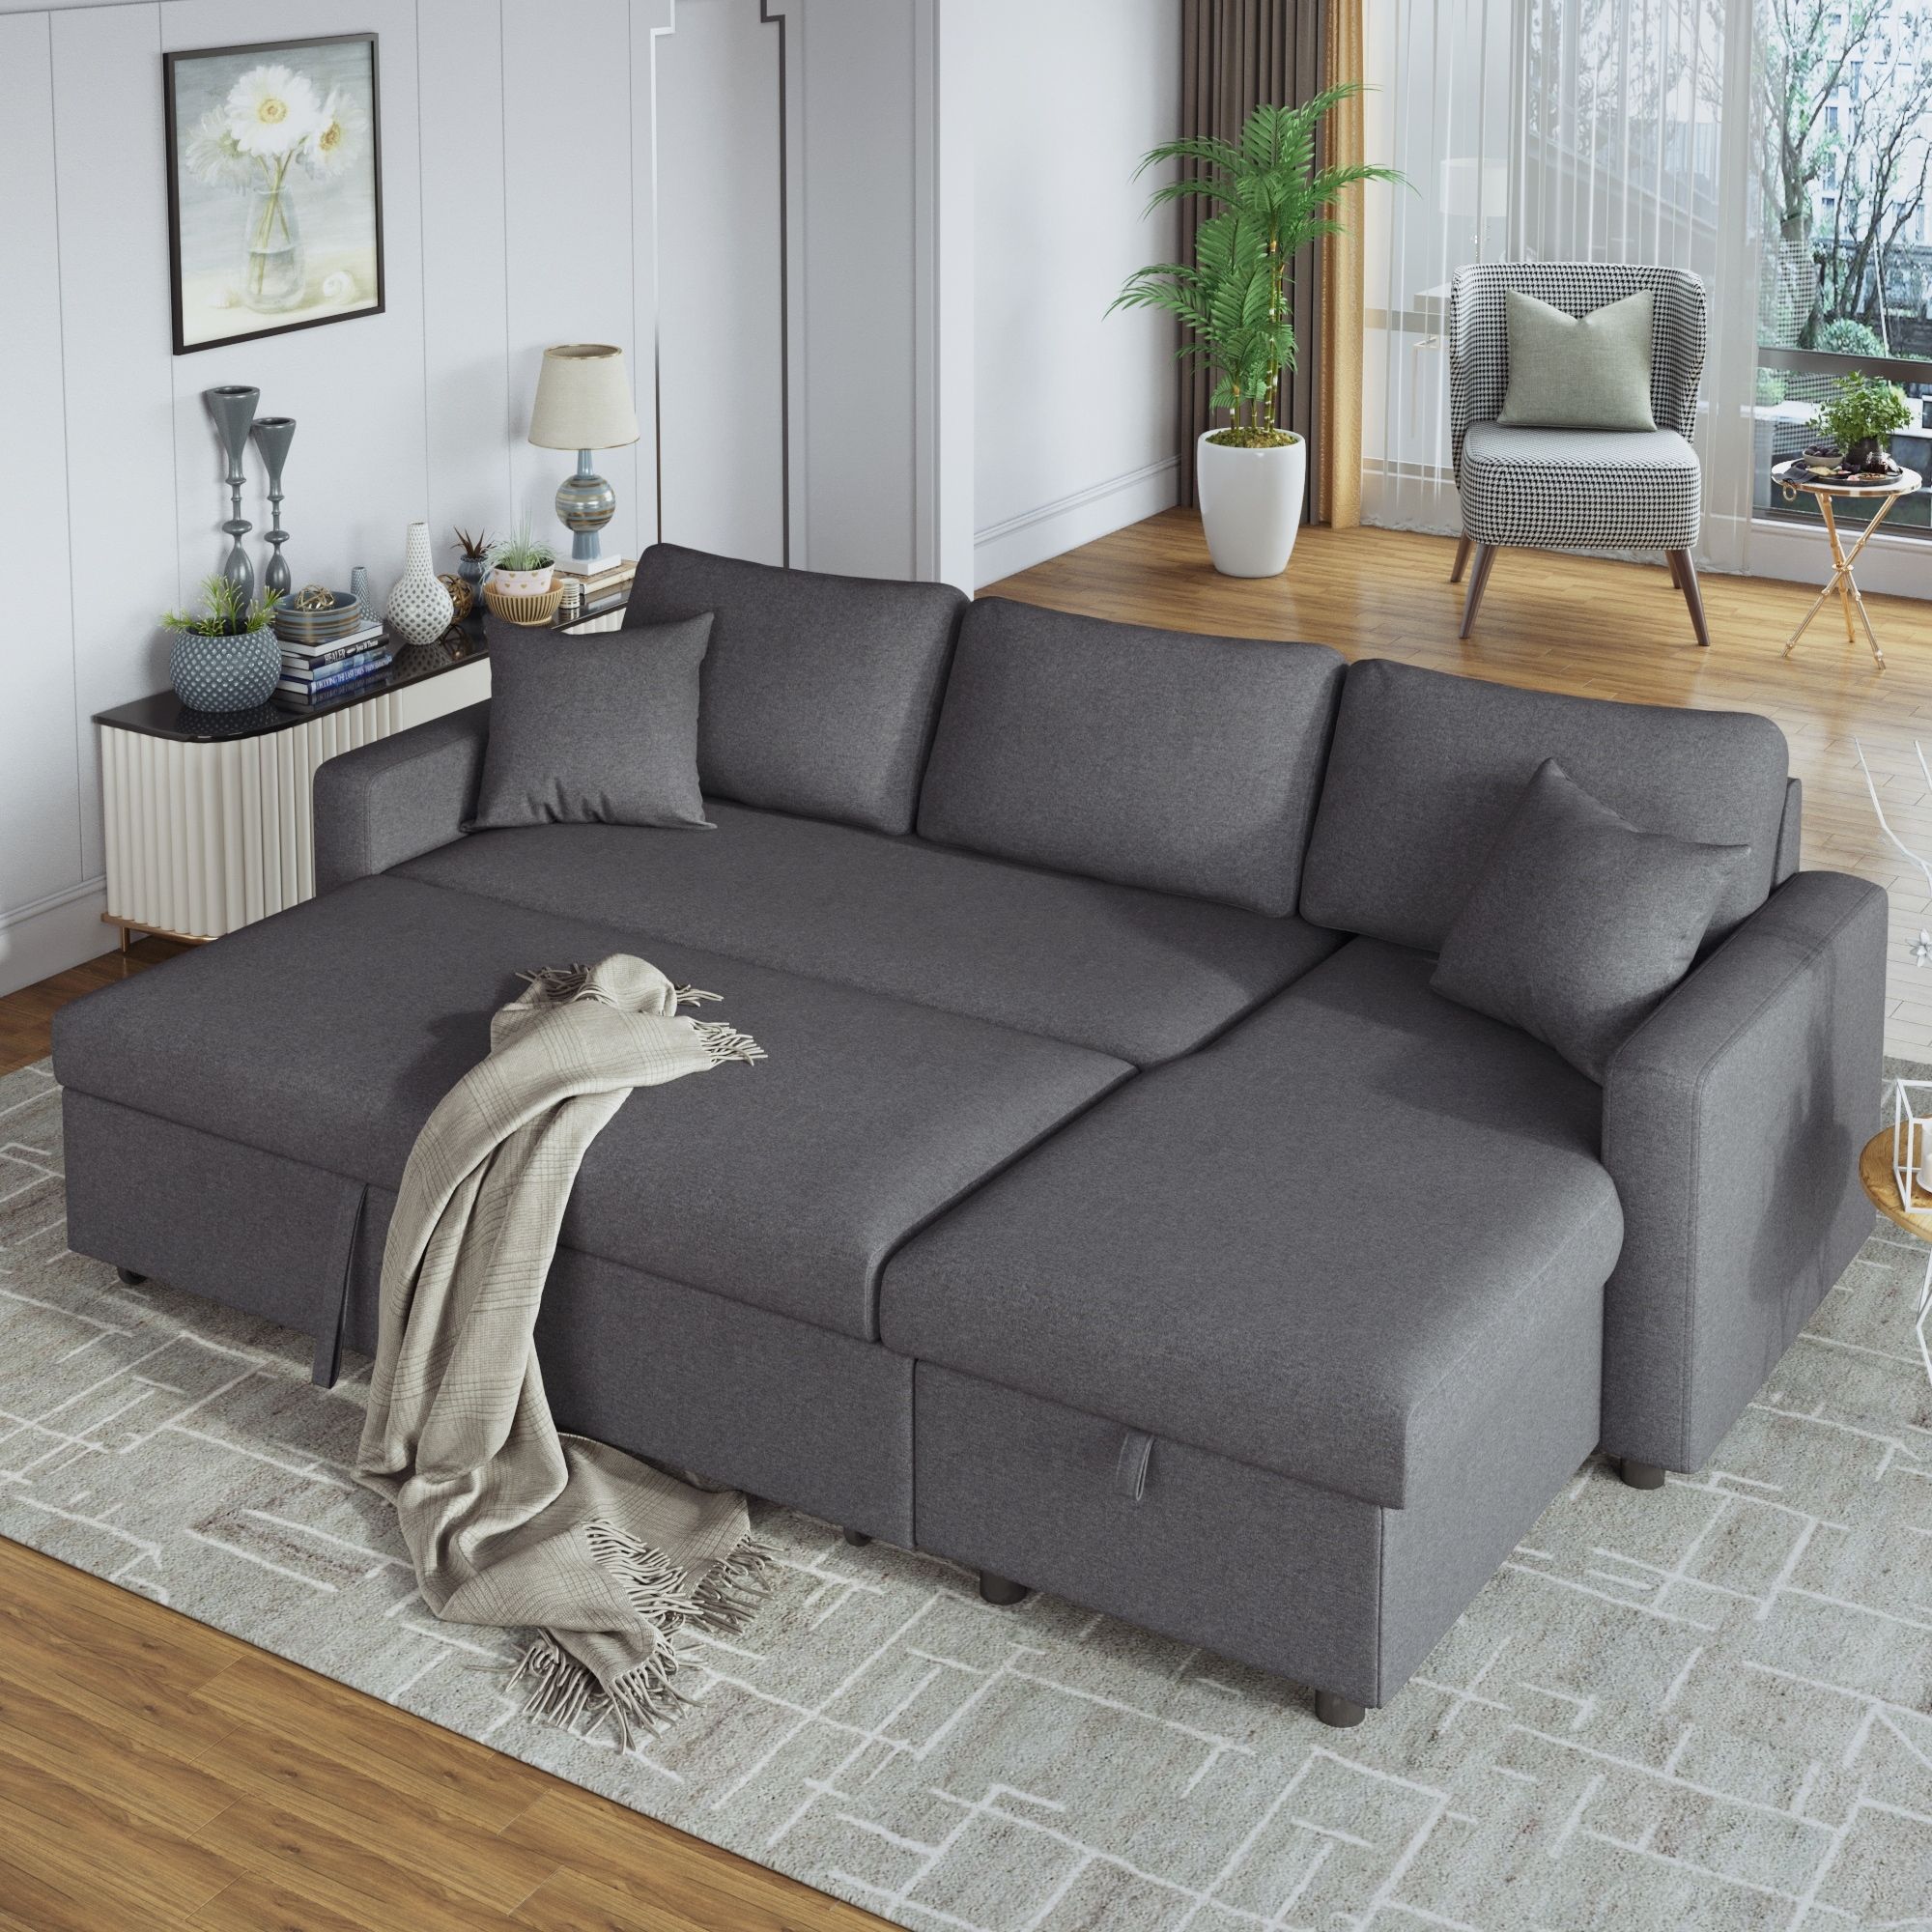 L Shape Sectional Sofa Convertible Twin Sofa Bed Sleeper With Storage Sofa  Chaise – Bed Bath & Beyond – 36797490 For Convertible L Shaped Sectional Sofas (View 4 of 24)